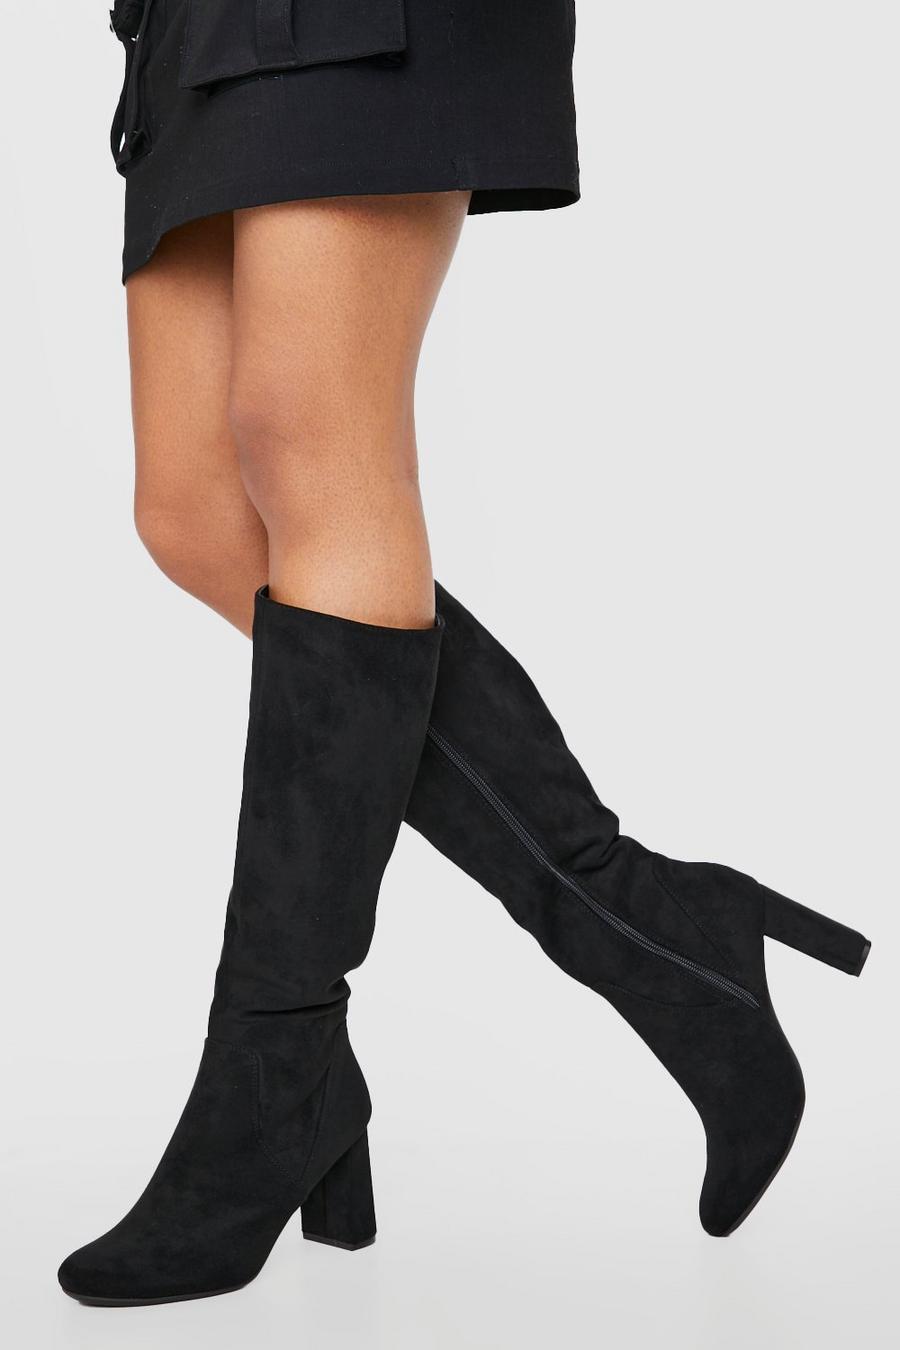 Black Faux Suede Knee High Heeled Boots image number 1